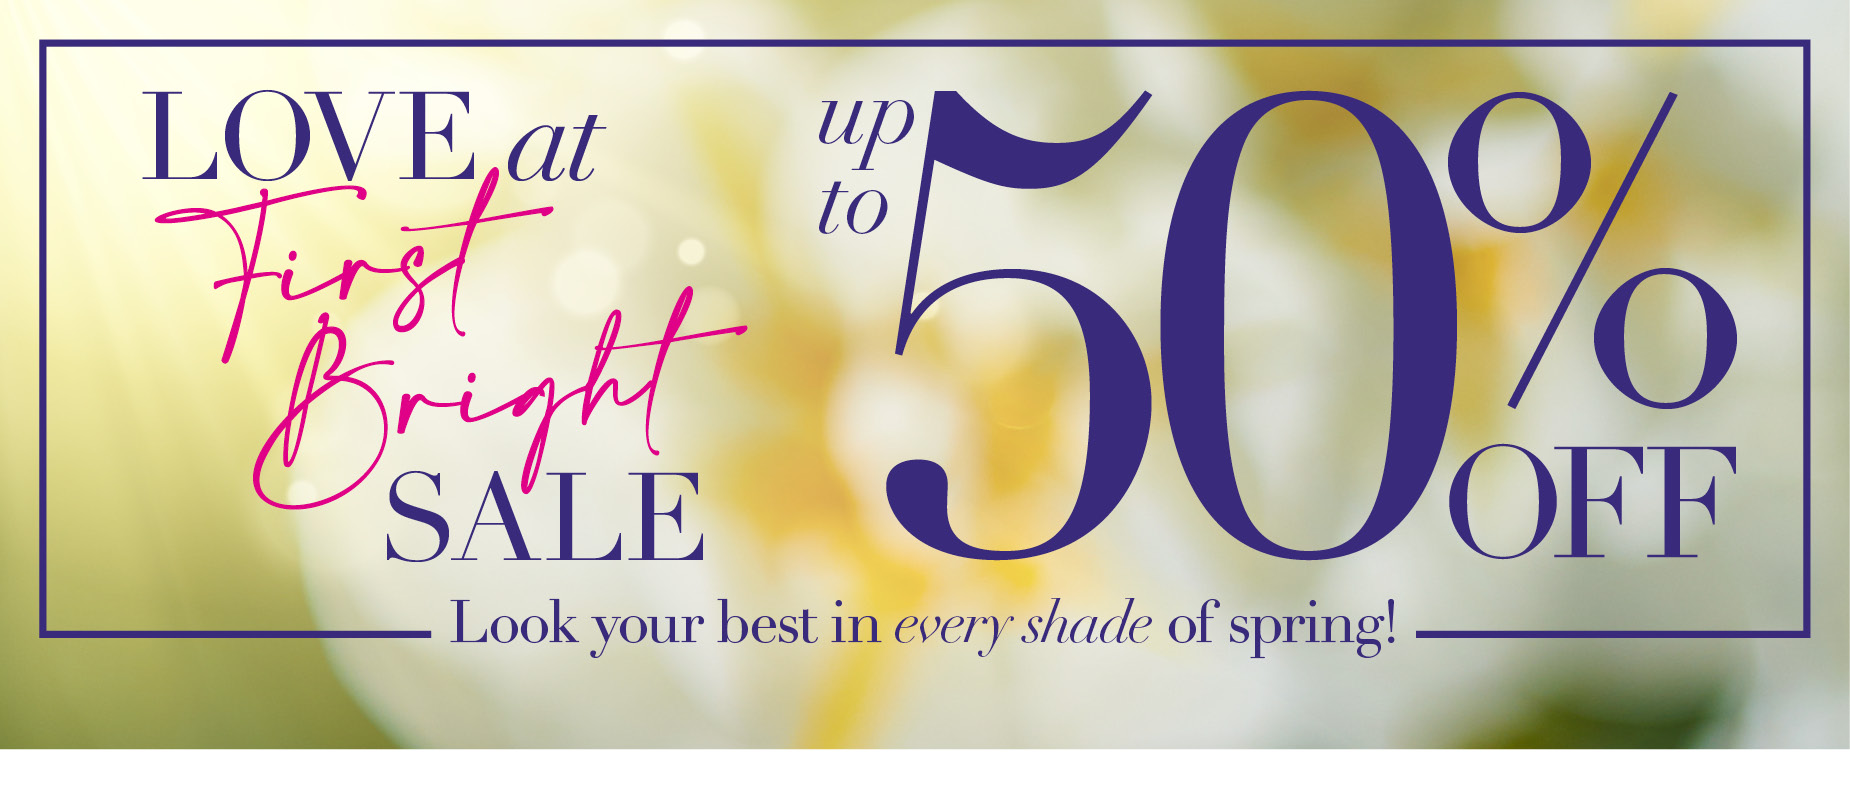 LOve at First Bright Sale. Up to 50% OFF